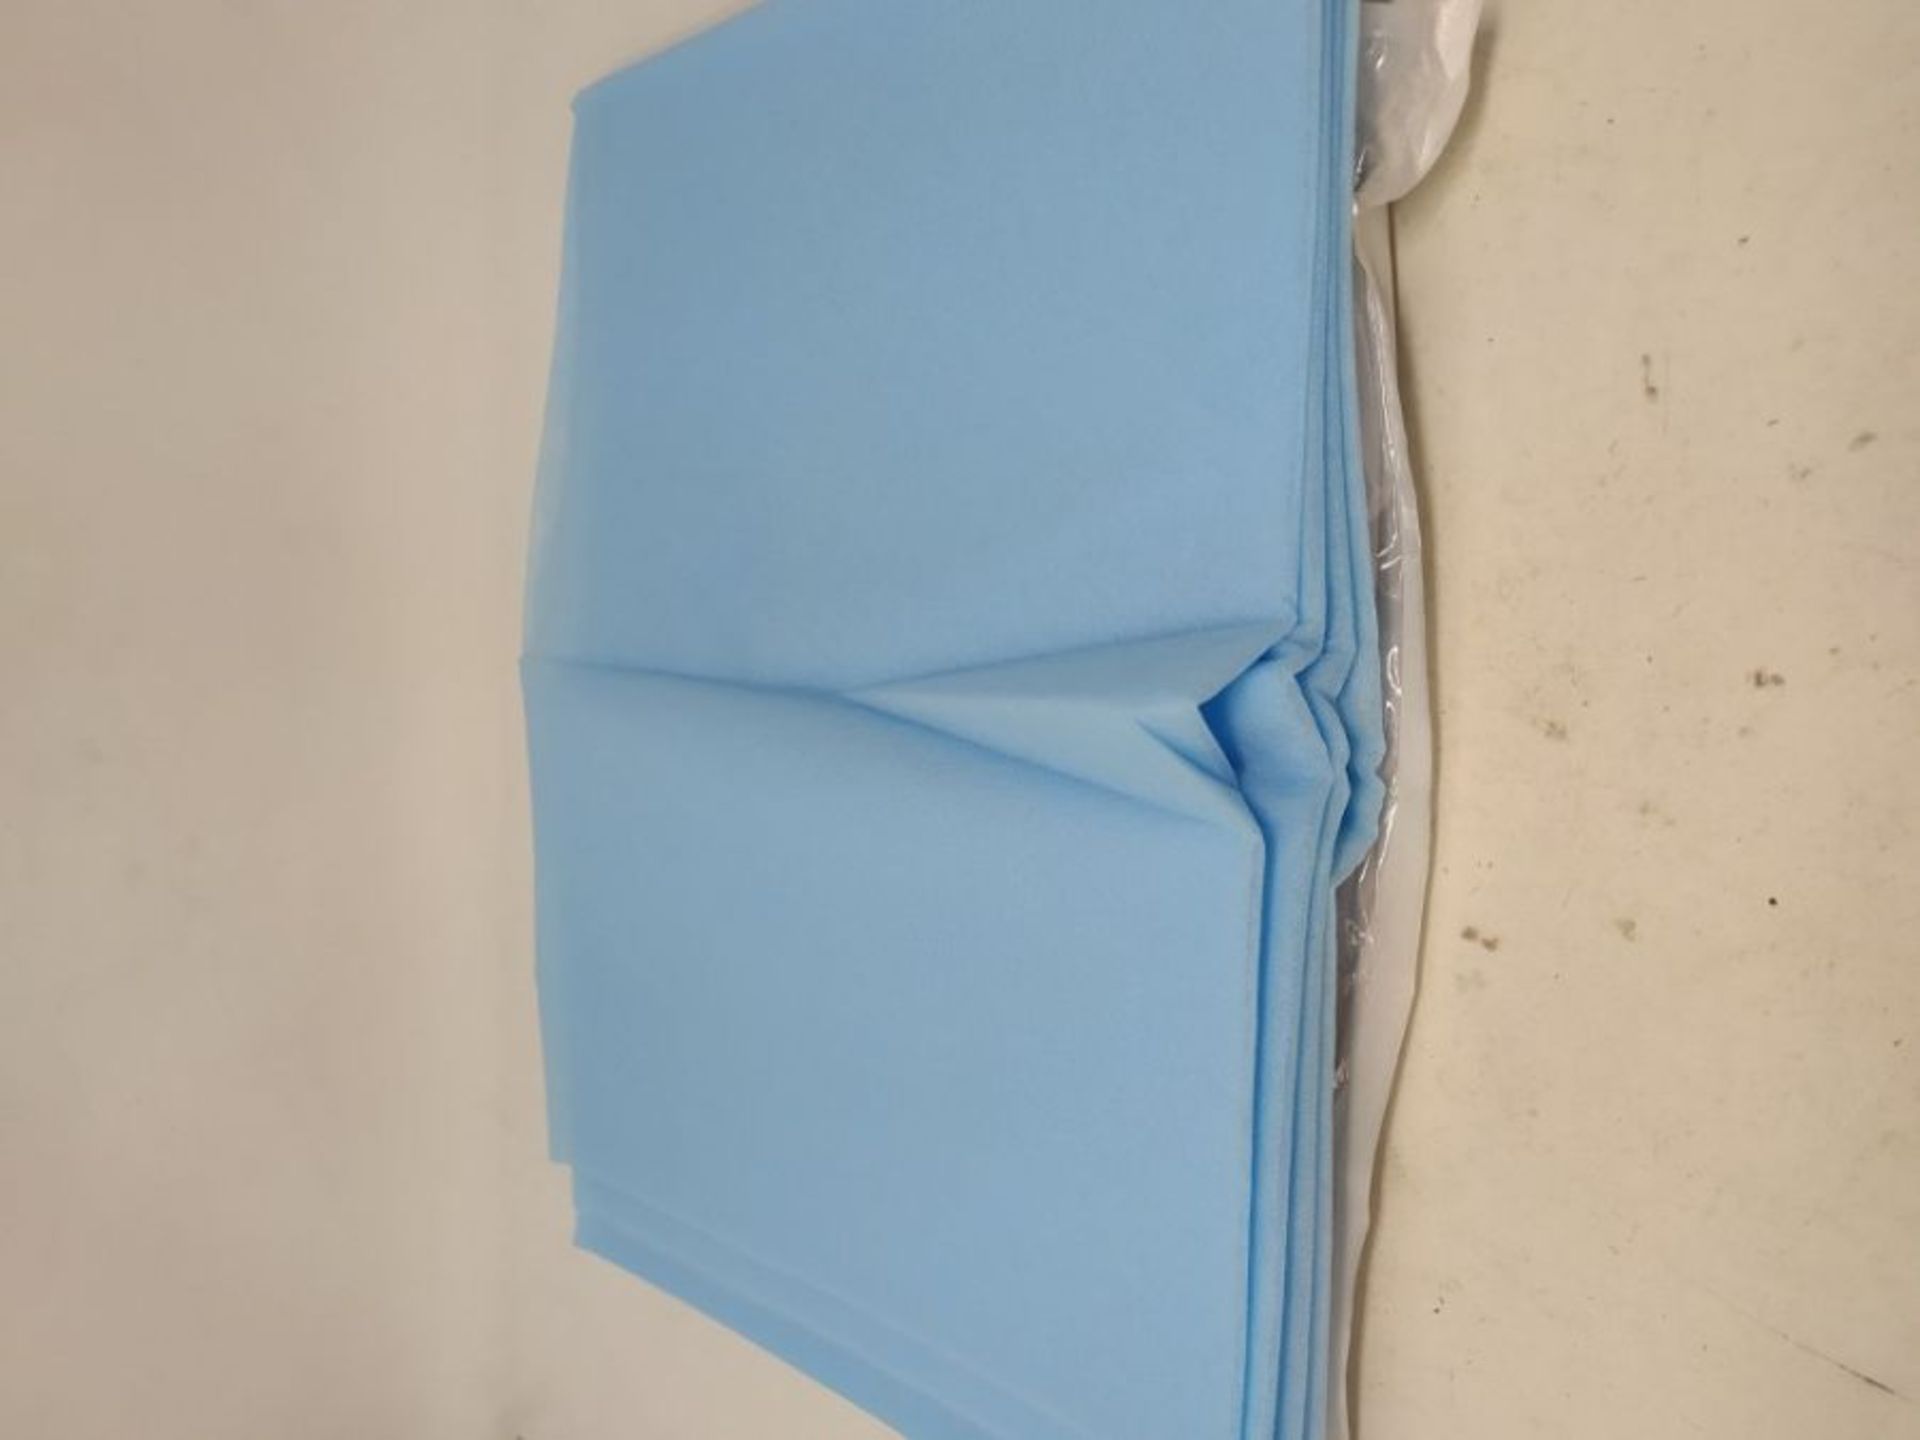 Primacare Sterile Burn Sheets with Latex Exam Gloves - Image 2 of 2